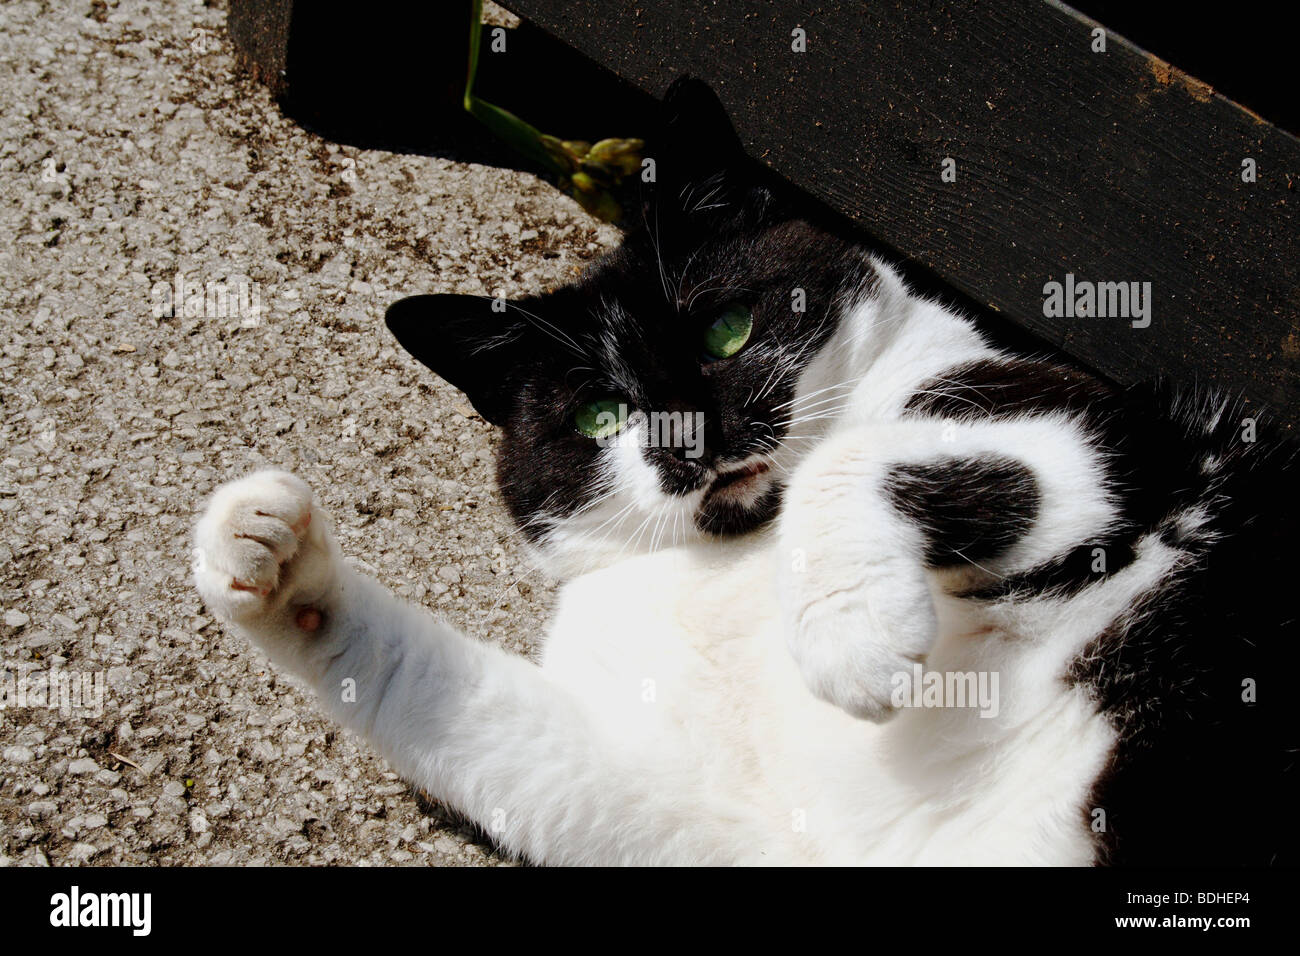 Playful Cat  Felis catus  Family Felidae with Green eyes kept as domestic pets or housecat Stock Photo